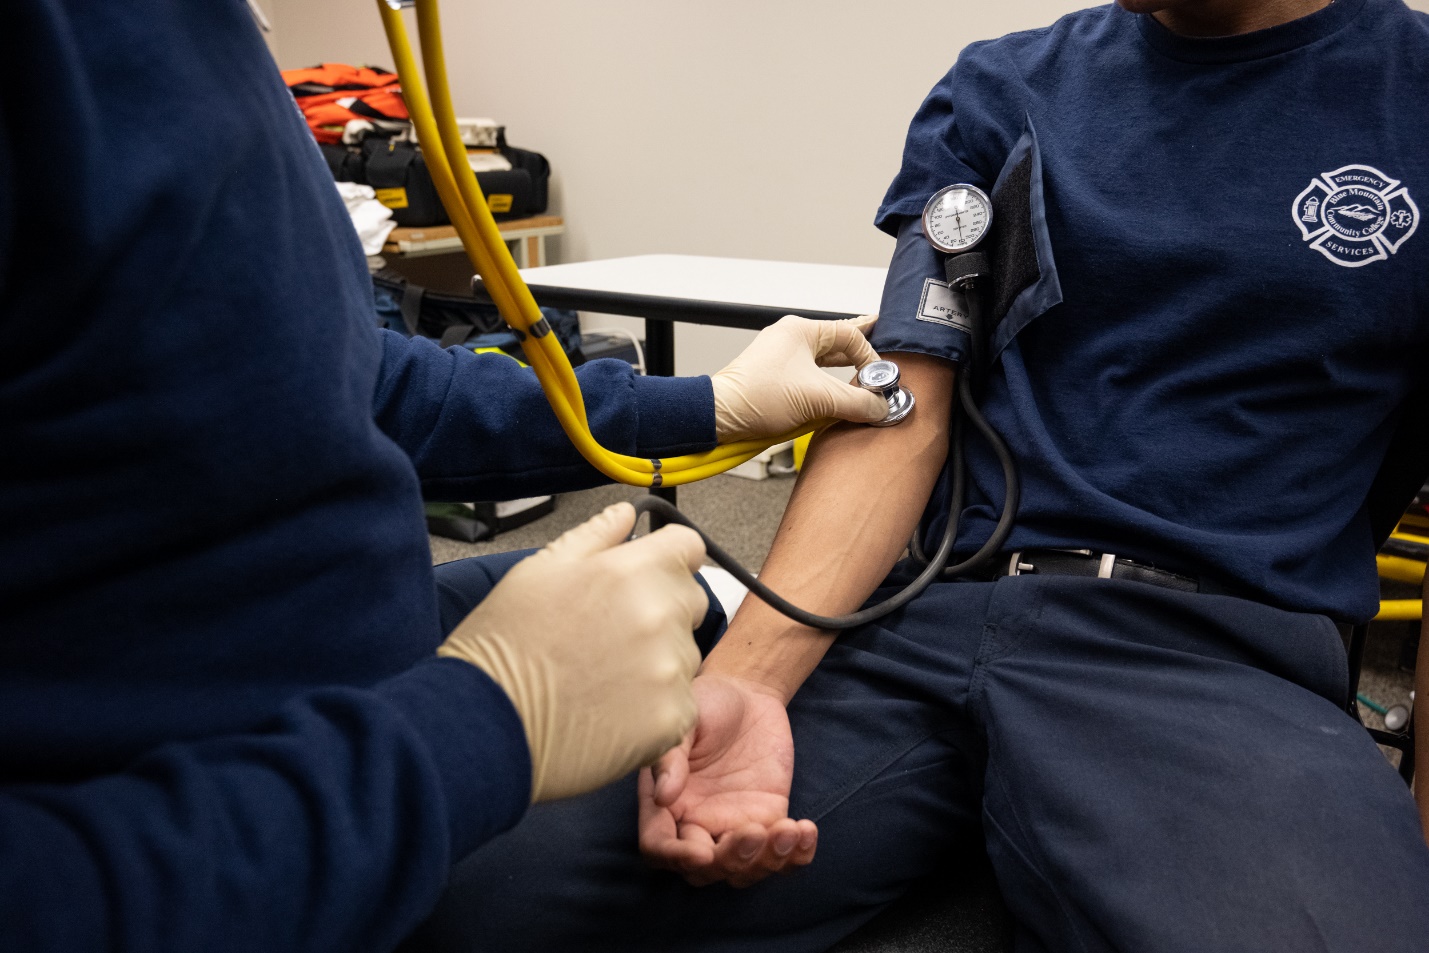 A gloved person, obtaining a blood pressure by auscultation on a patient. The bell of the stethoscope is on anterior/medial portion of the patients' arm.